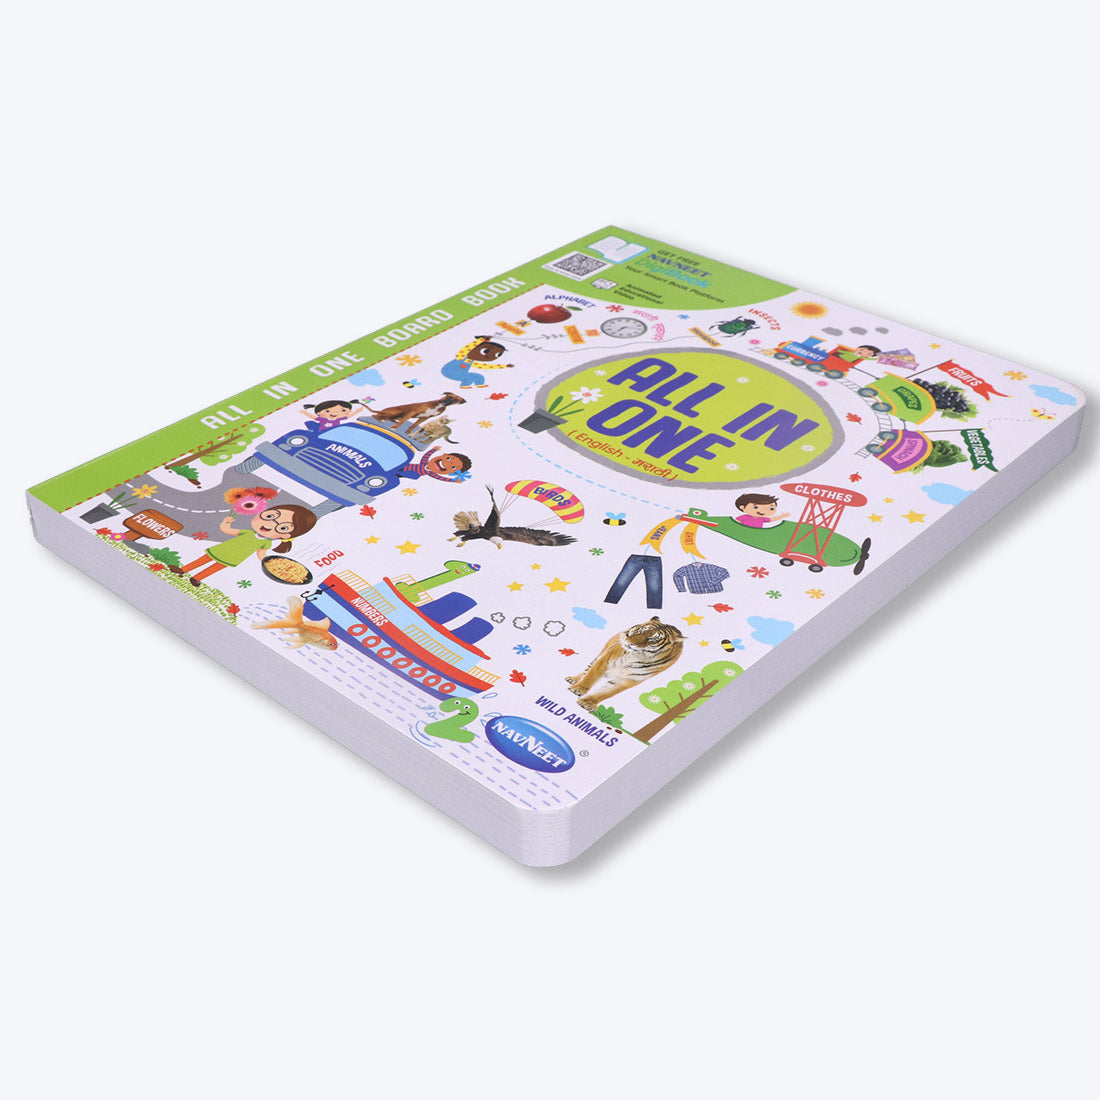 Navneet All In One Board Book (Marathi) - First Early Learning book for Kindergarten - Picture Board book for toddlers and babies - eBook - Animated interactive book - Audio Book